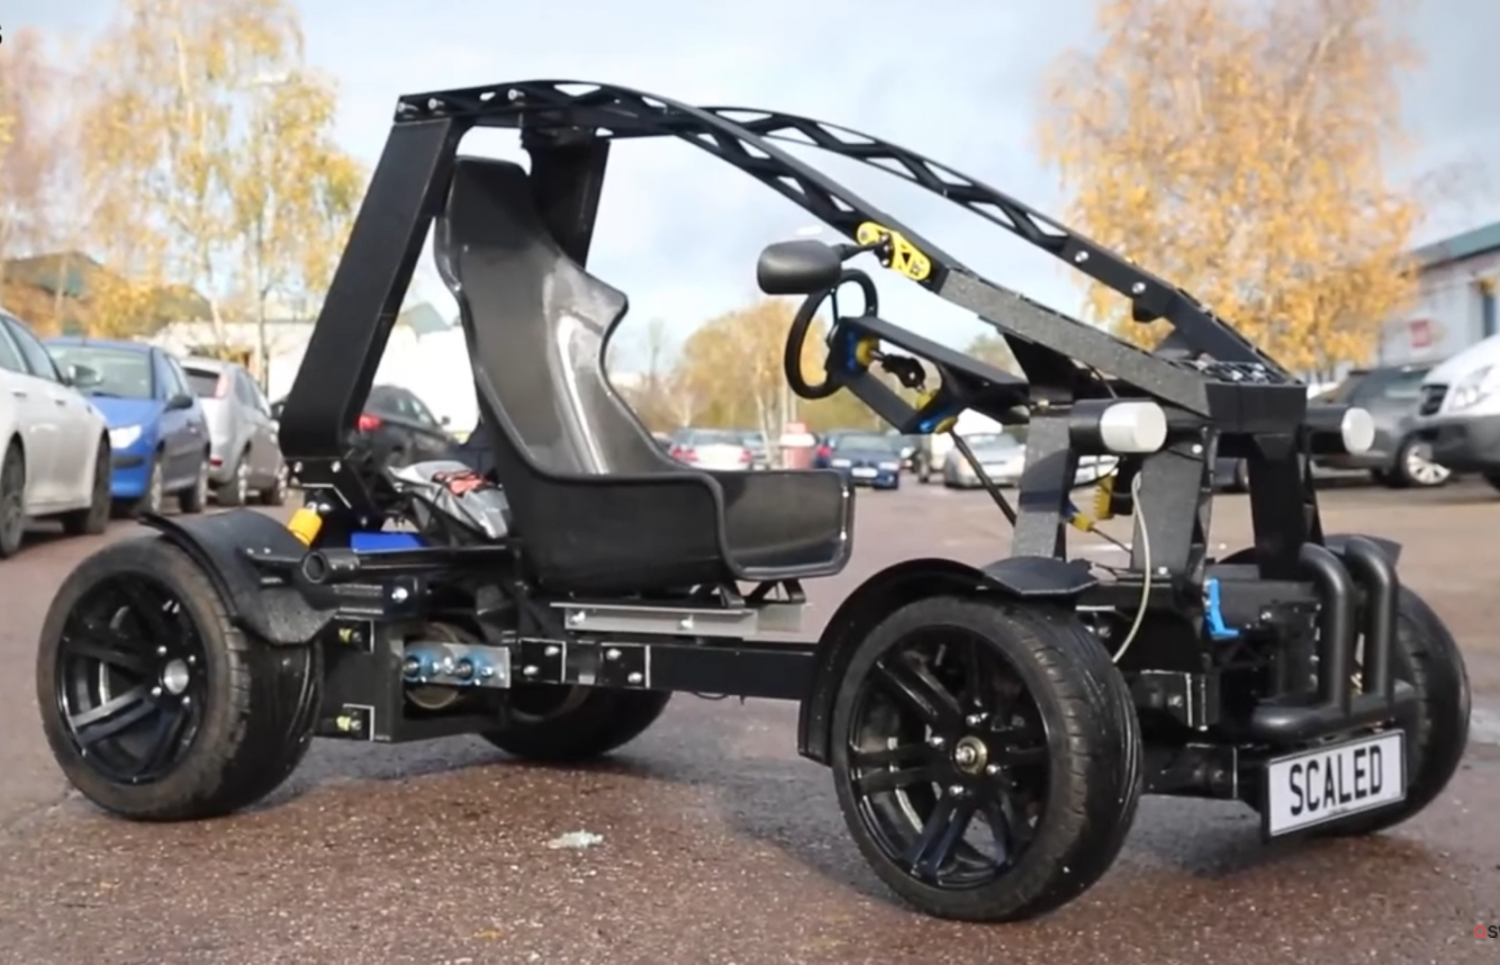 Chameleon Europe's First Working 3DPrinted Electric Vehicle Science